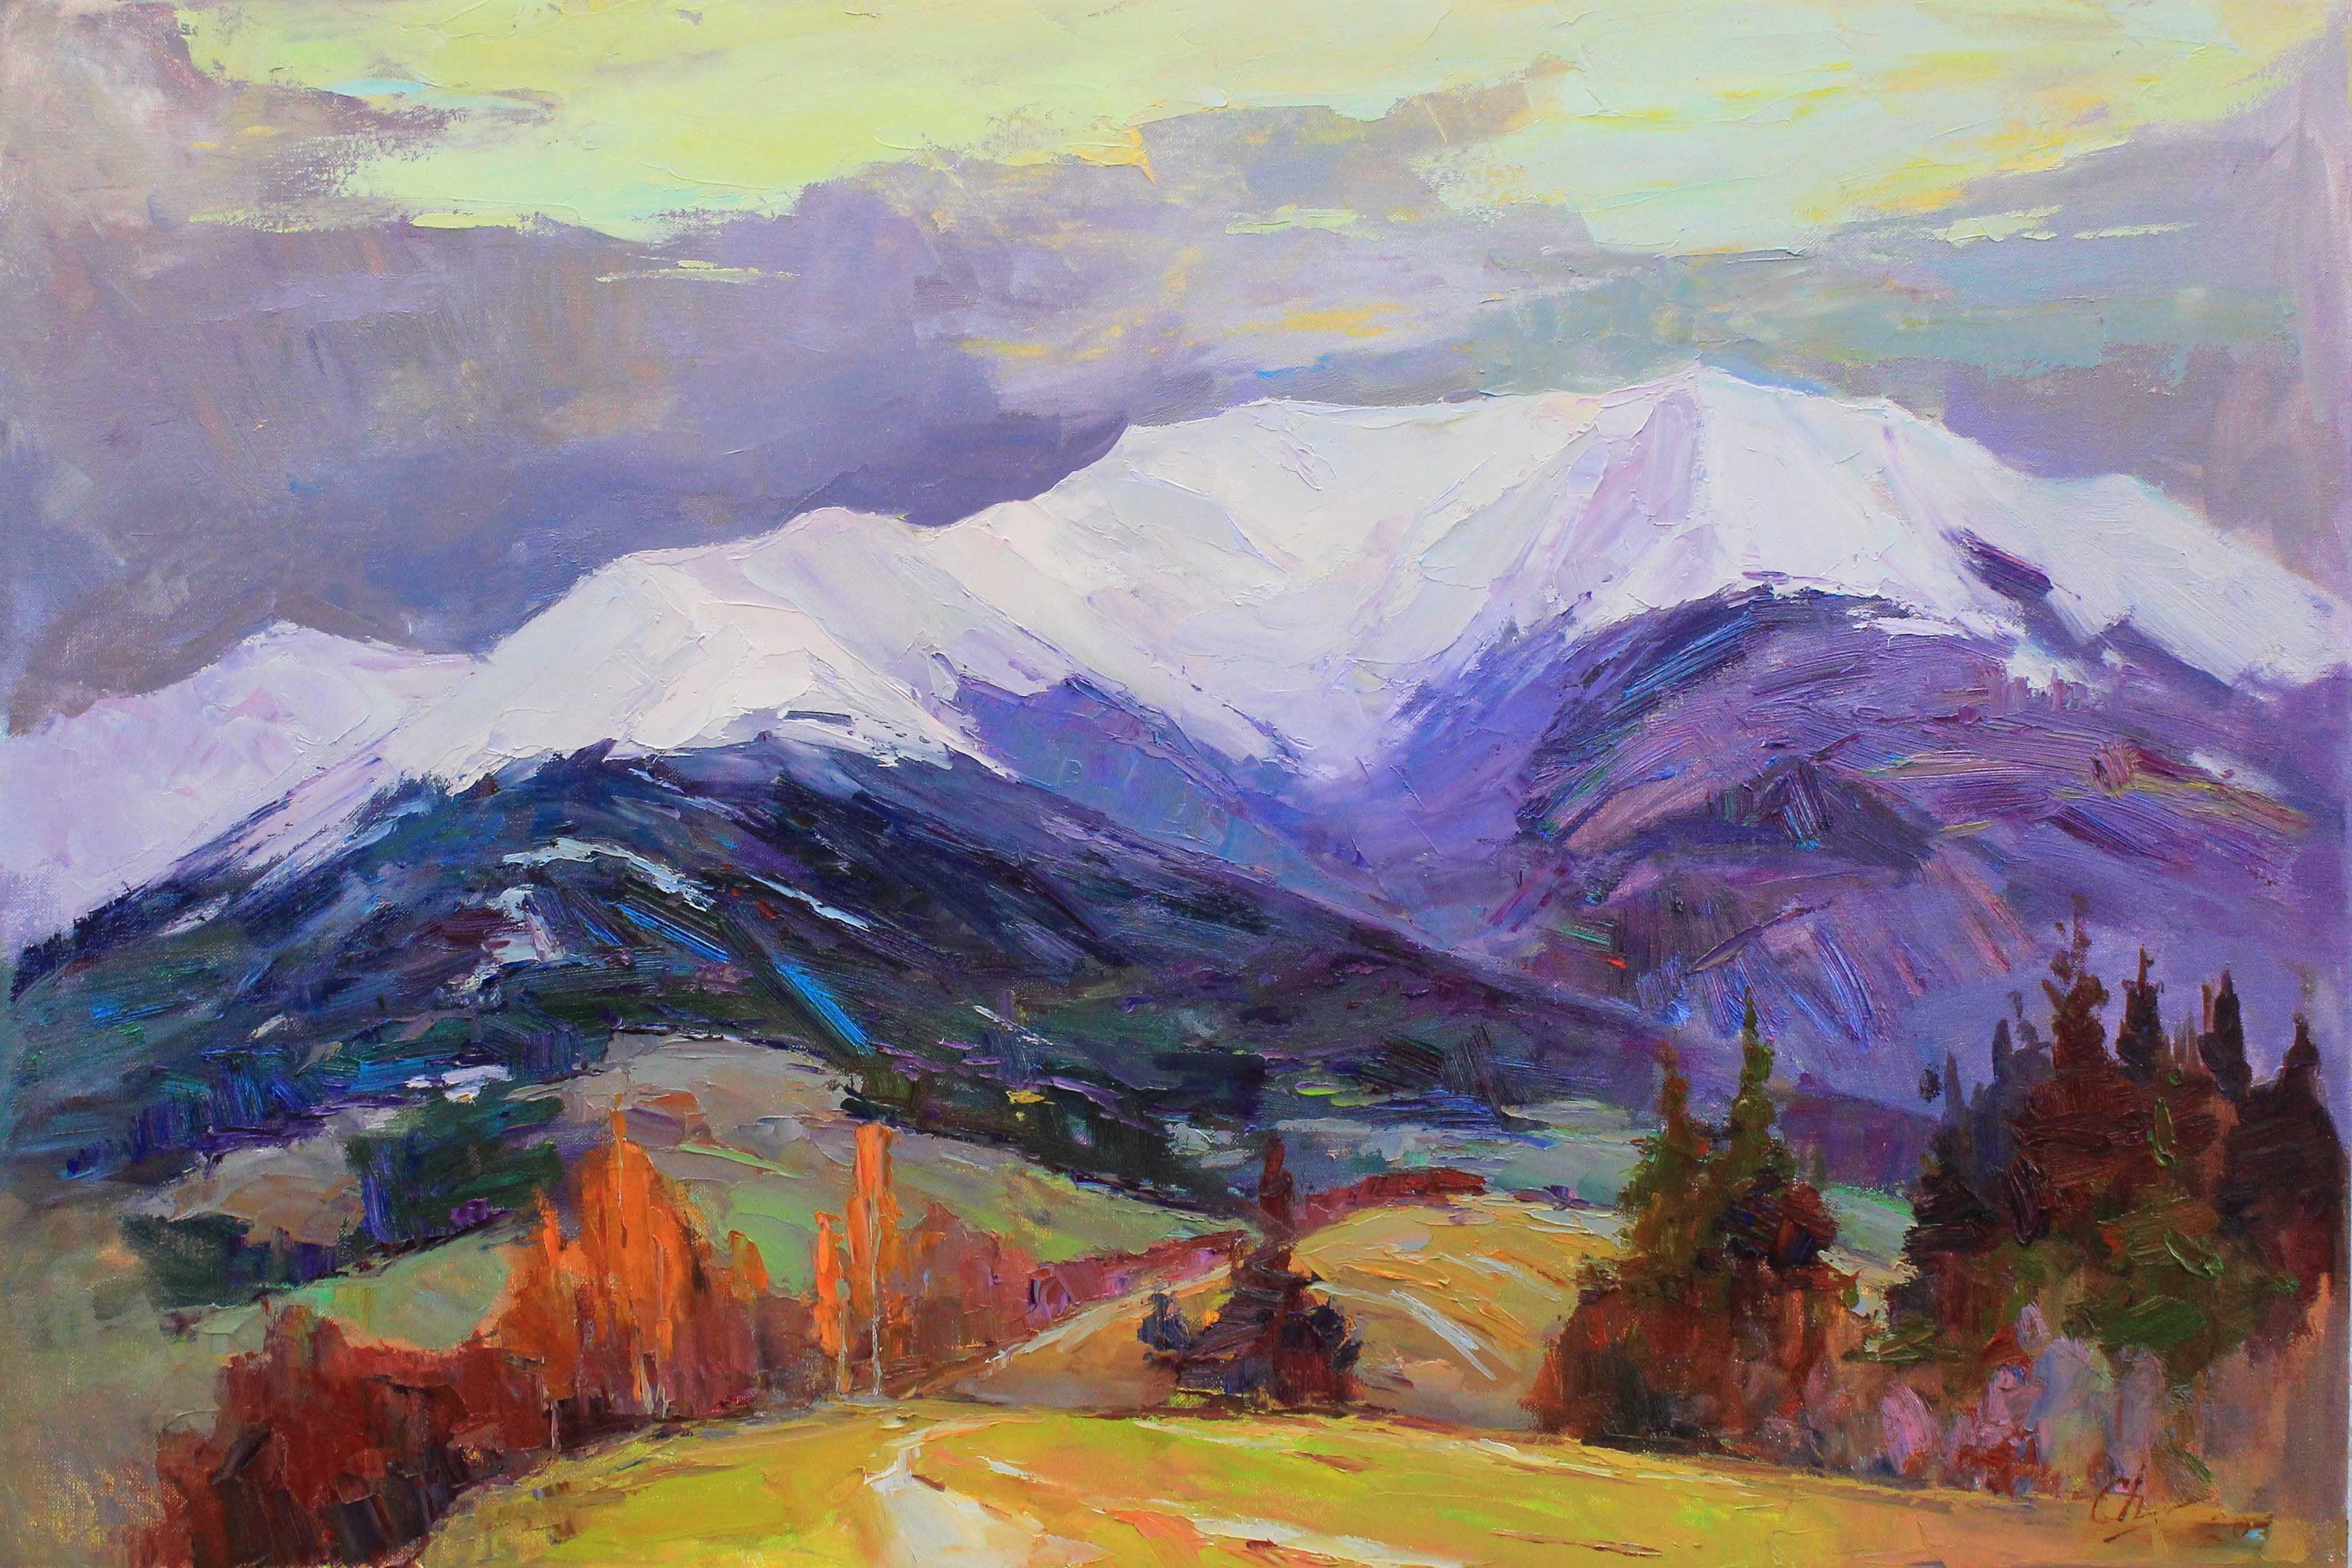 Sergei Chernyakovsky Landscape Painting - Among the mountains, Painting, Oil on Canvas